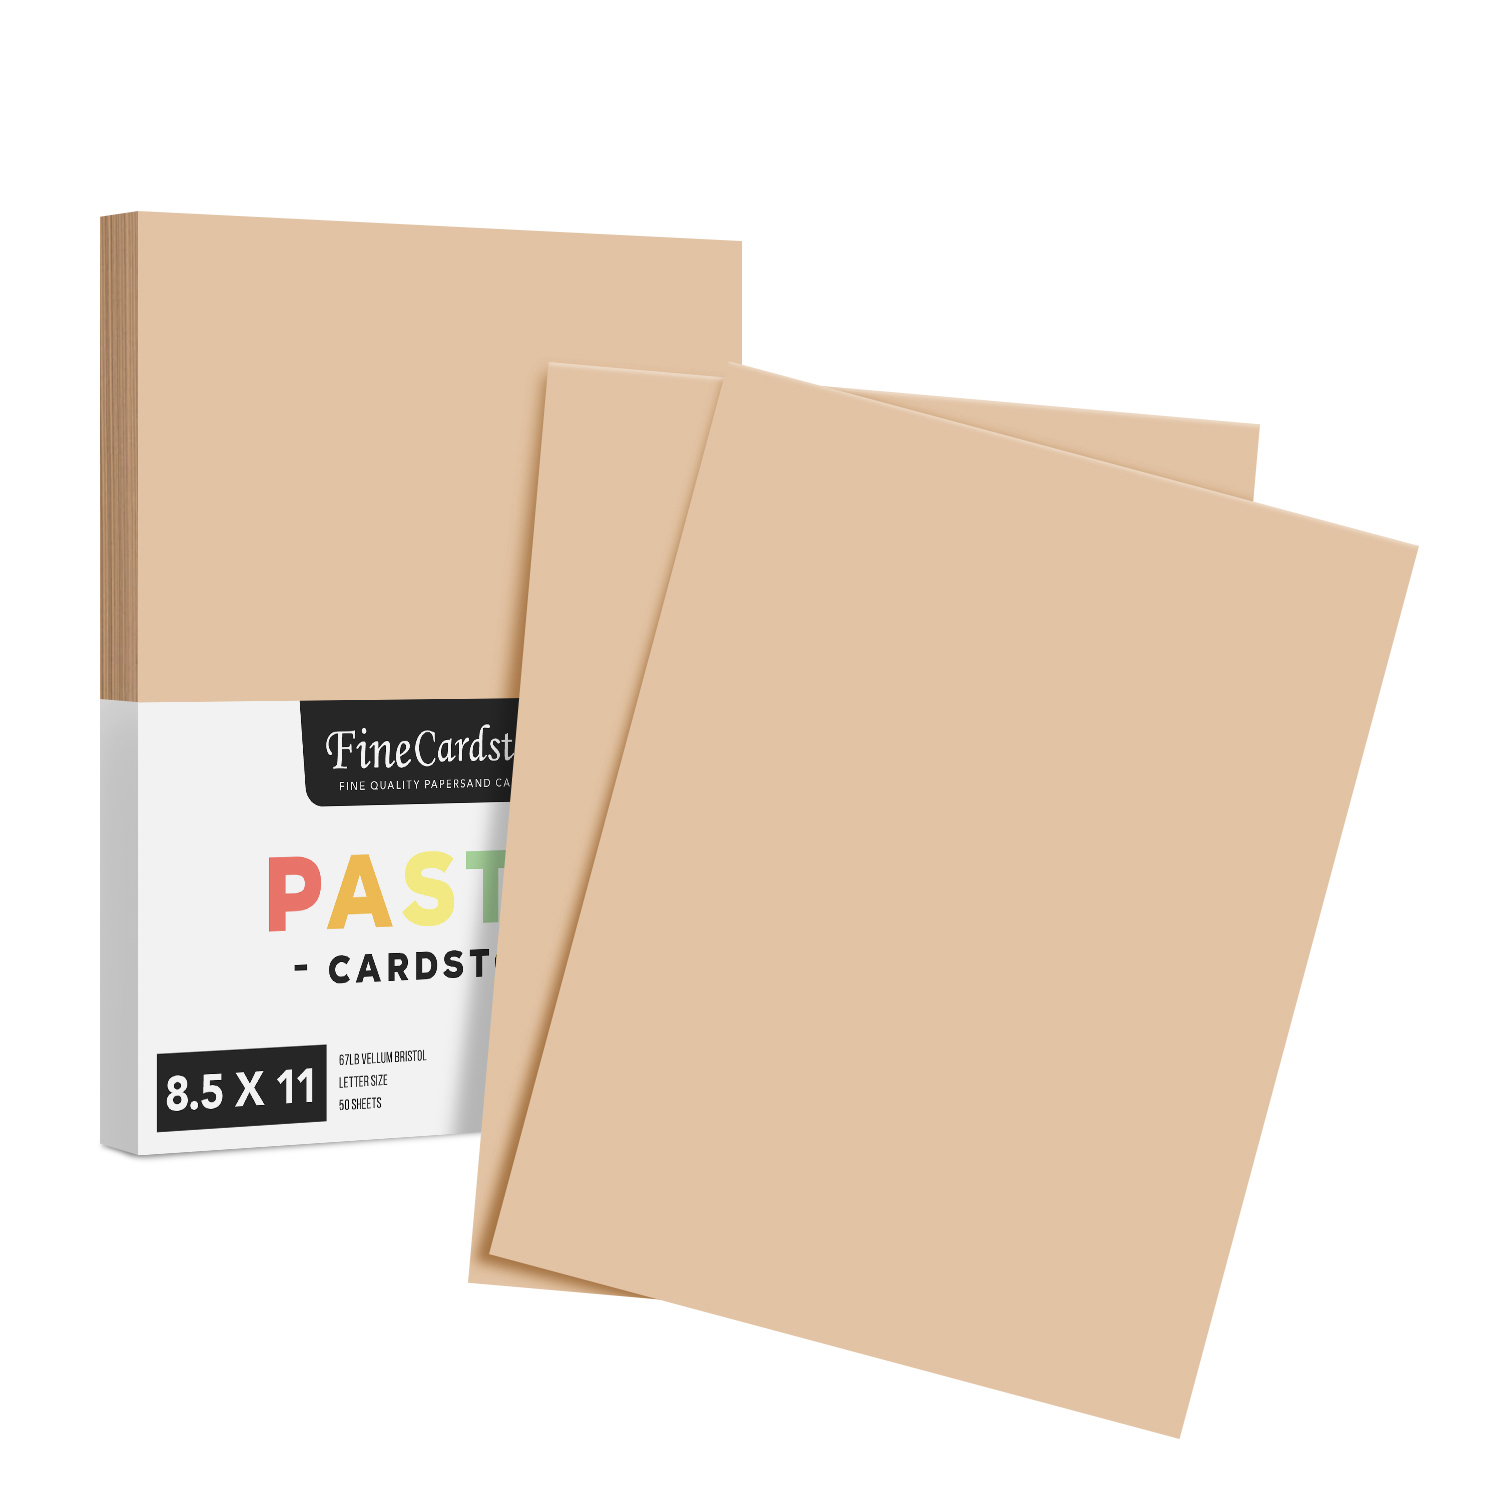 5 x 7 Chipboard - Bulk and Wholesale - Fine Cardstock